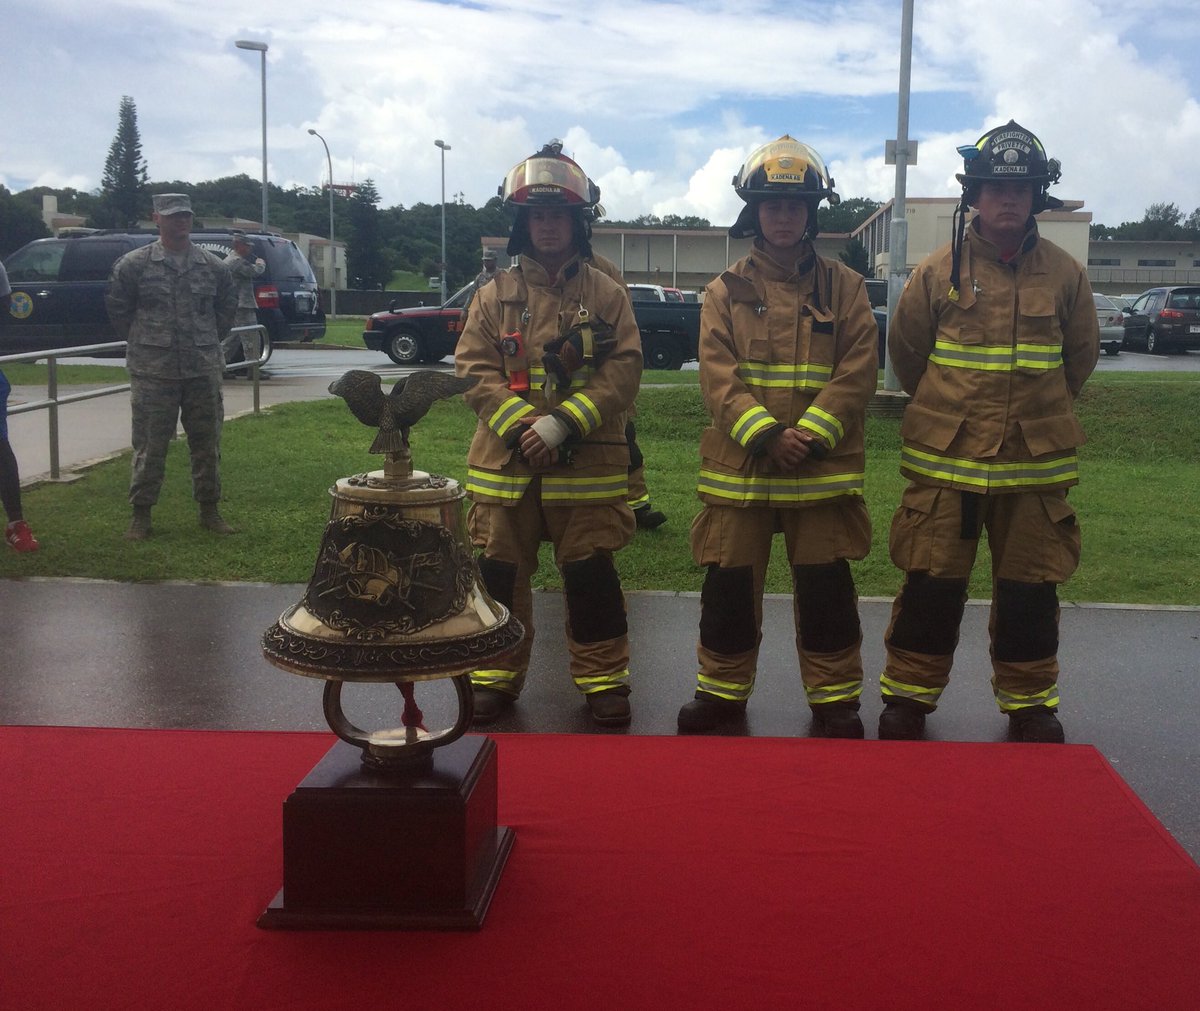 #TeamKadena #firefighters are leading the 9/11 Remembrance ceremony. #911Museum #911Neverforget @PACAF @air_fifth @USFJSEL @usairforce @USForcesJapan @PacificCommand